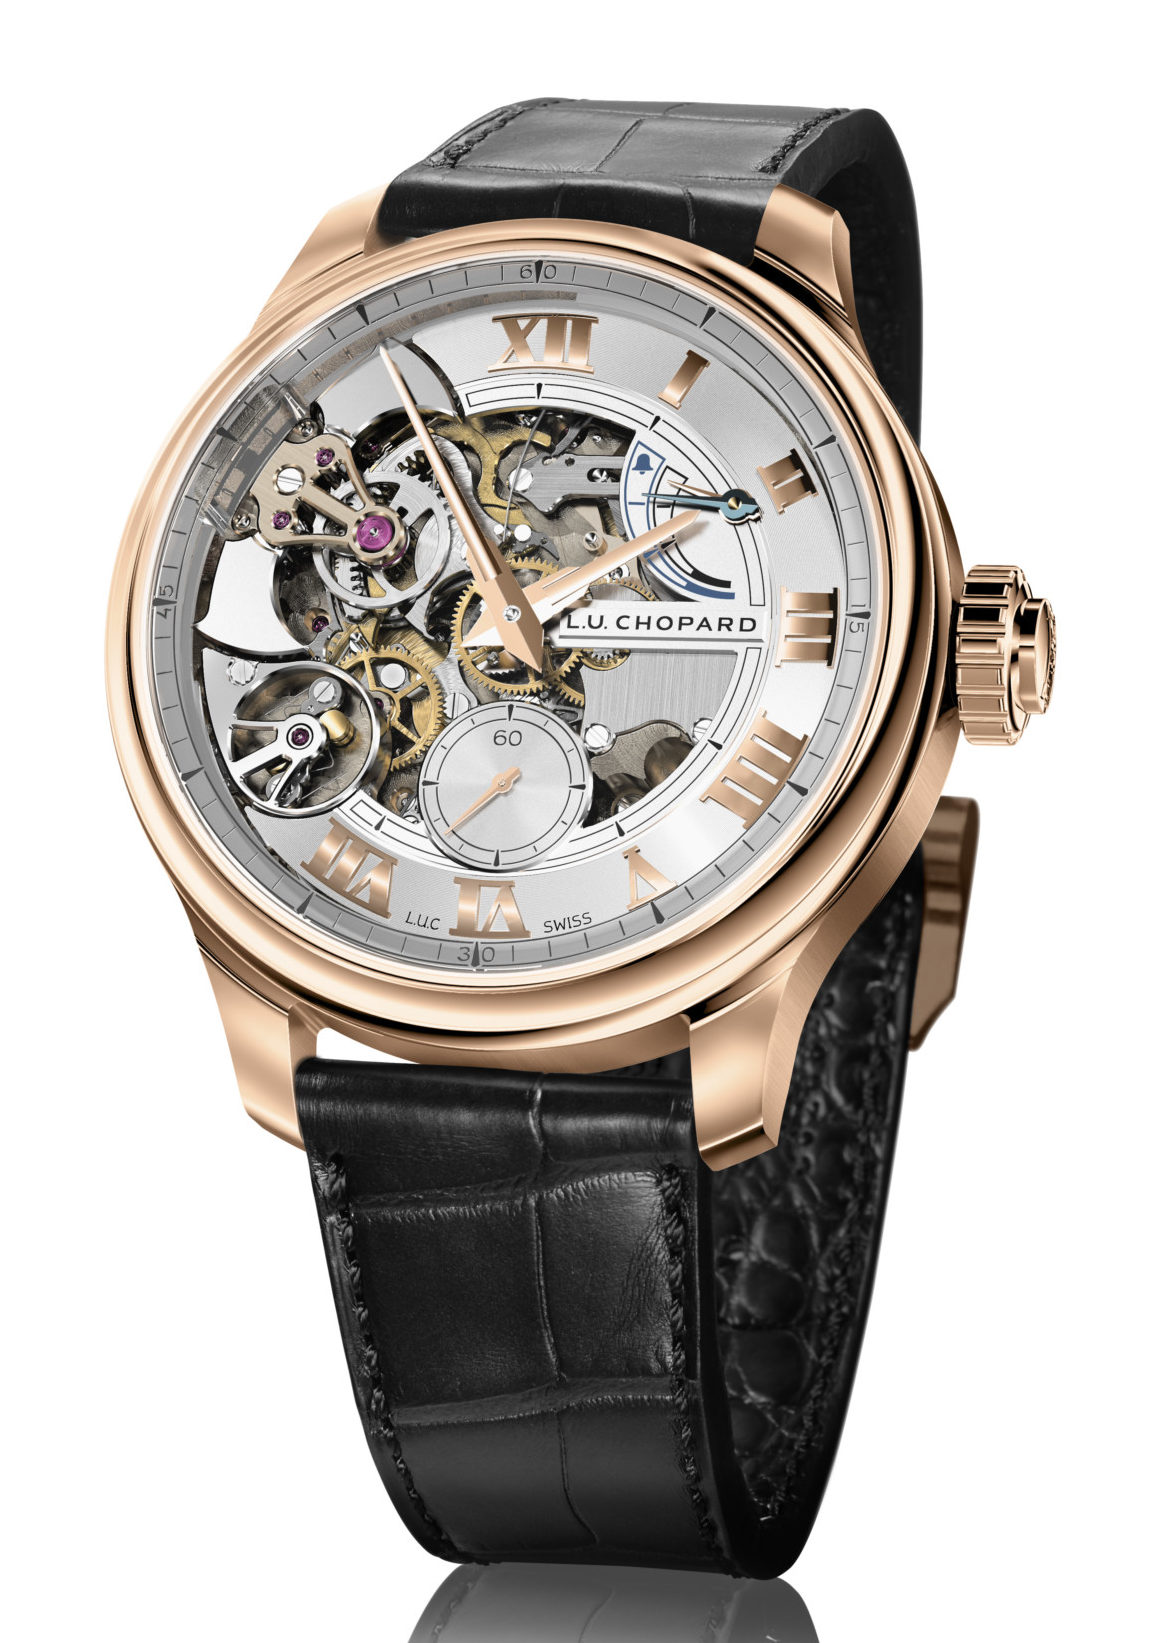 The “aiguille d’or” prize was won by: chopard, l. U. C for its full strike timepiece.